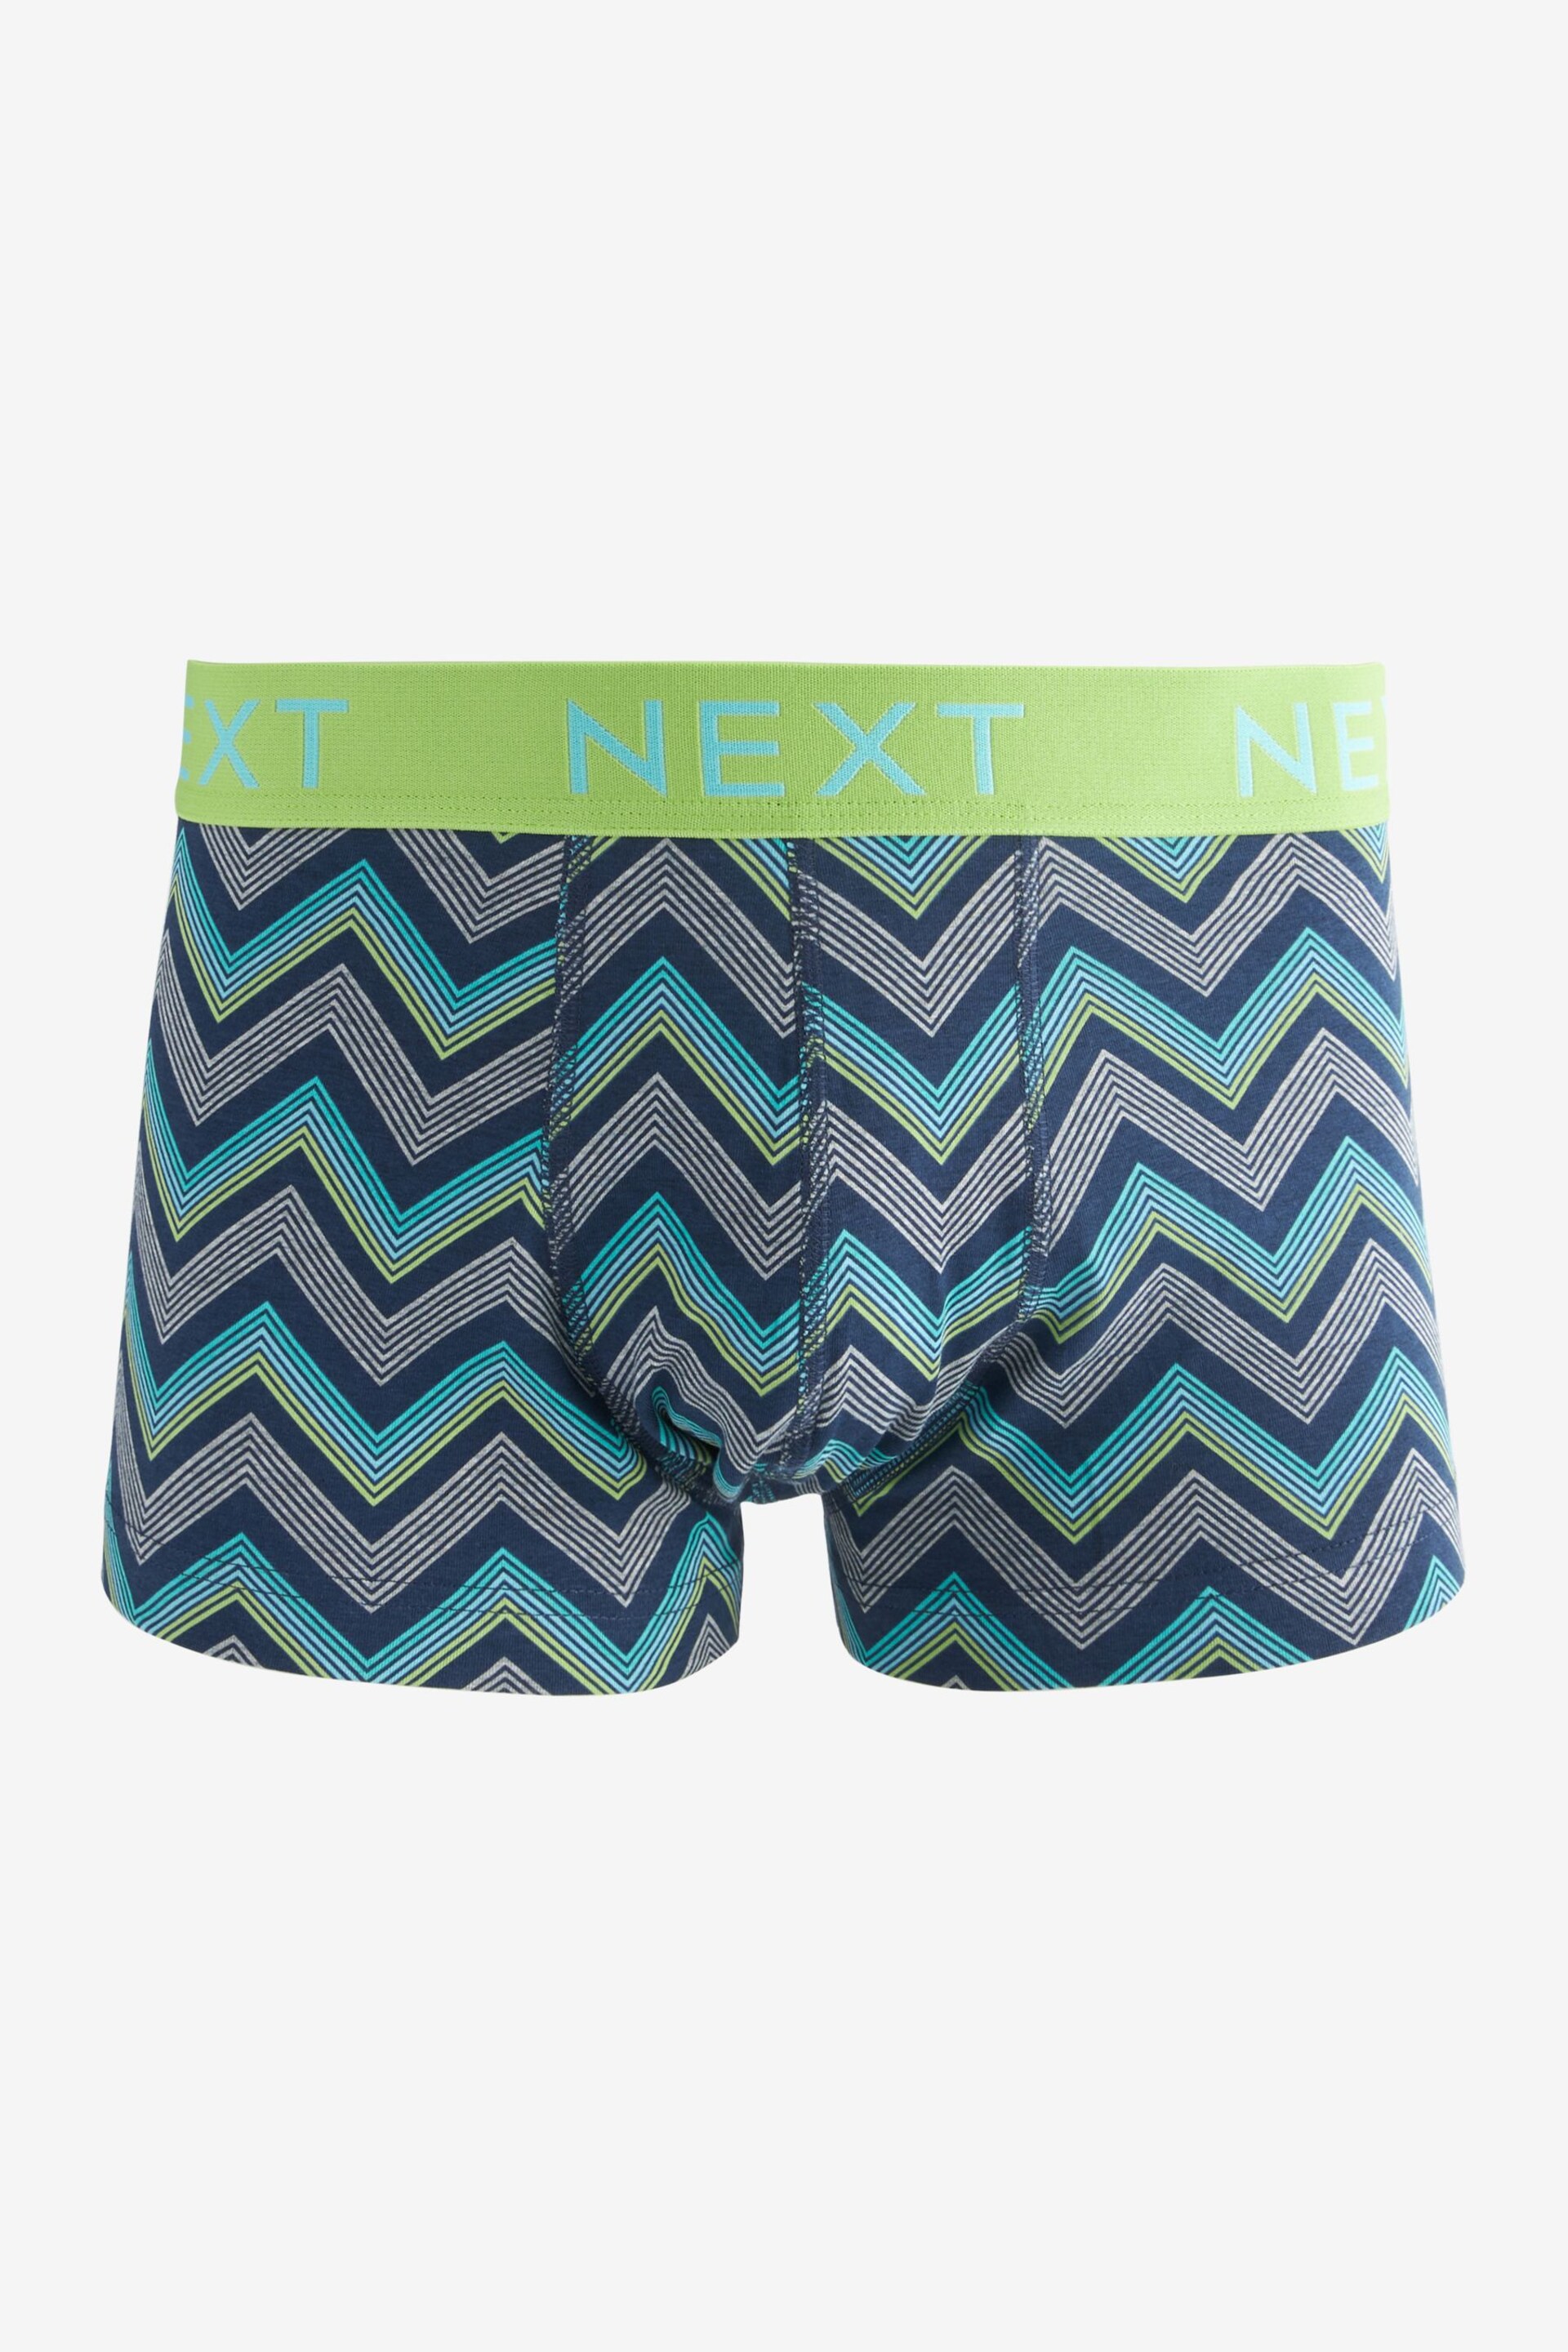 Grey Colour Pop Zig Zag Stripe Pattern 4 pack Hipsters - Image 3 of 7